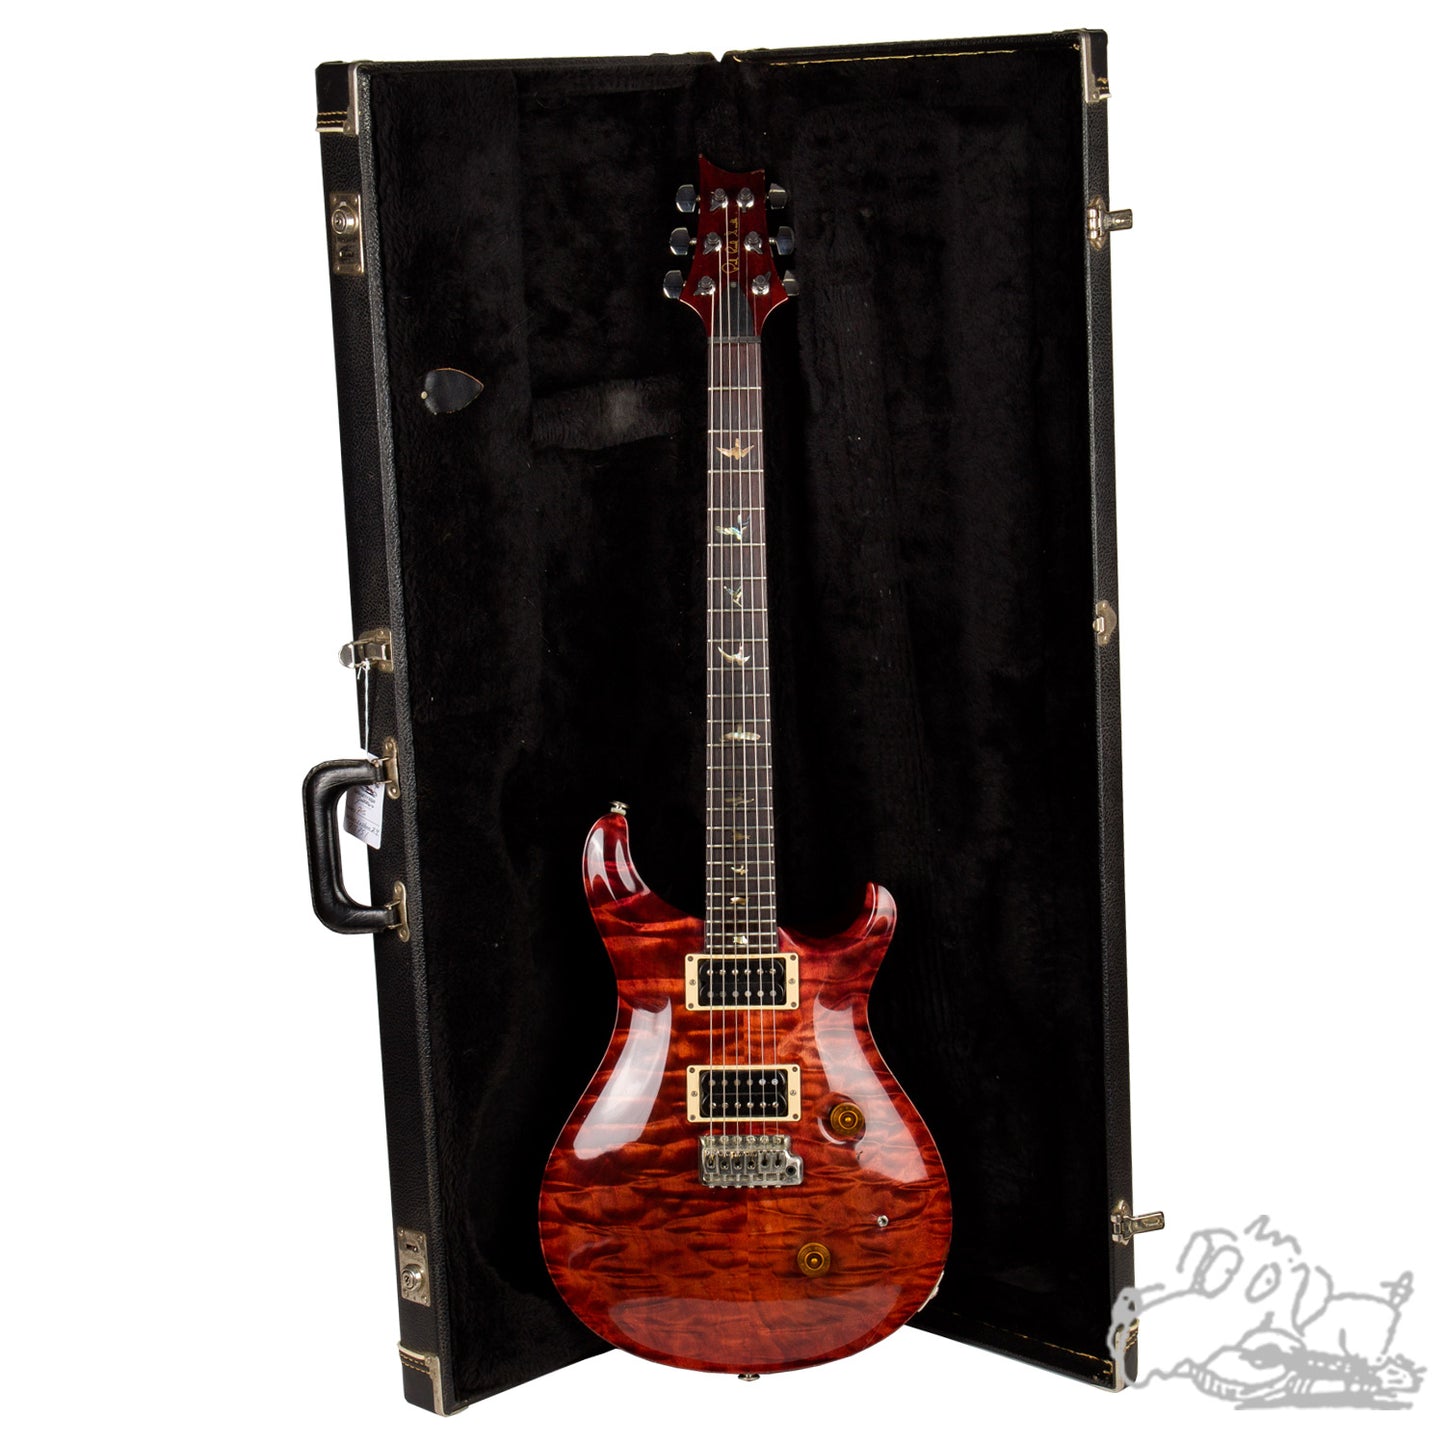 1987 PRS Custom 24 in Tortoise Shell with a Killer Quilt Top!